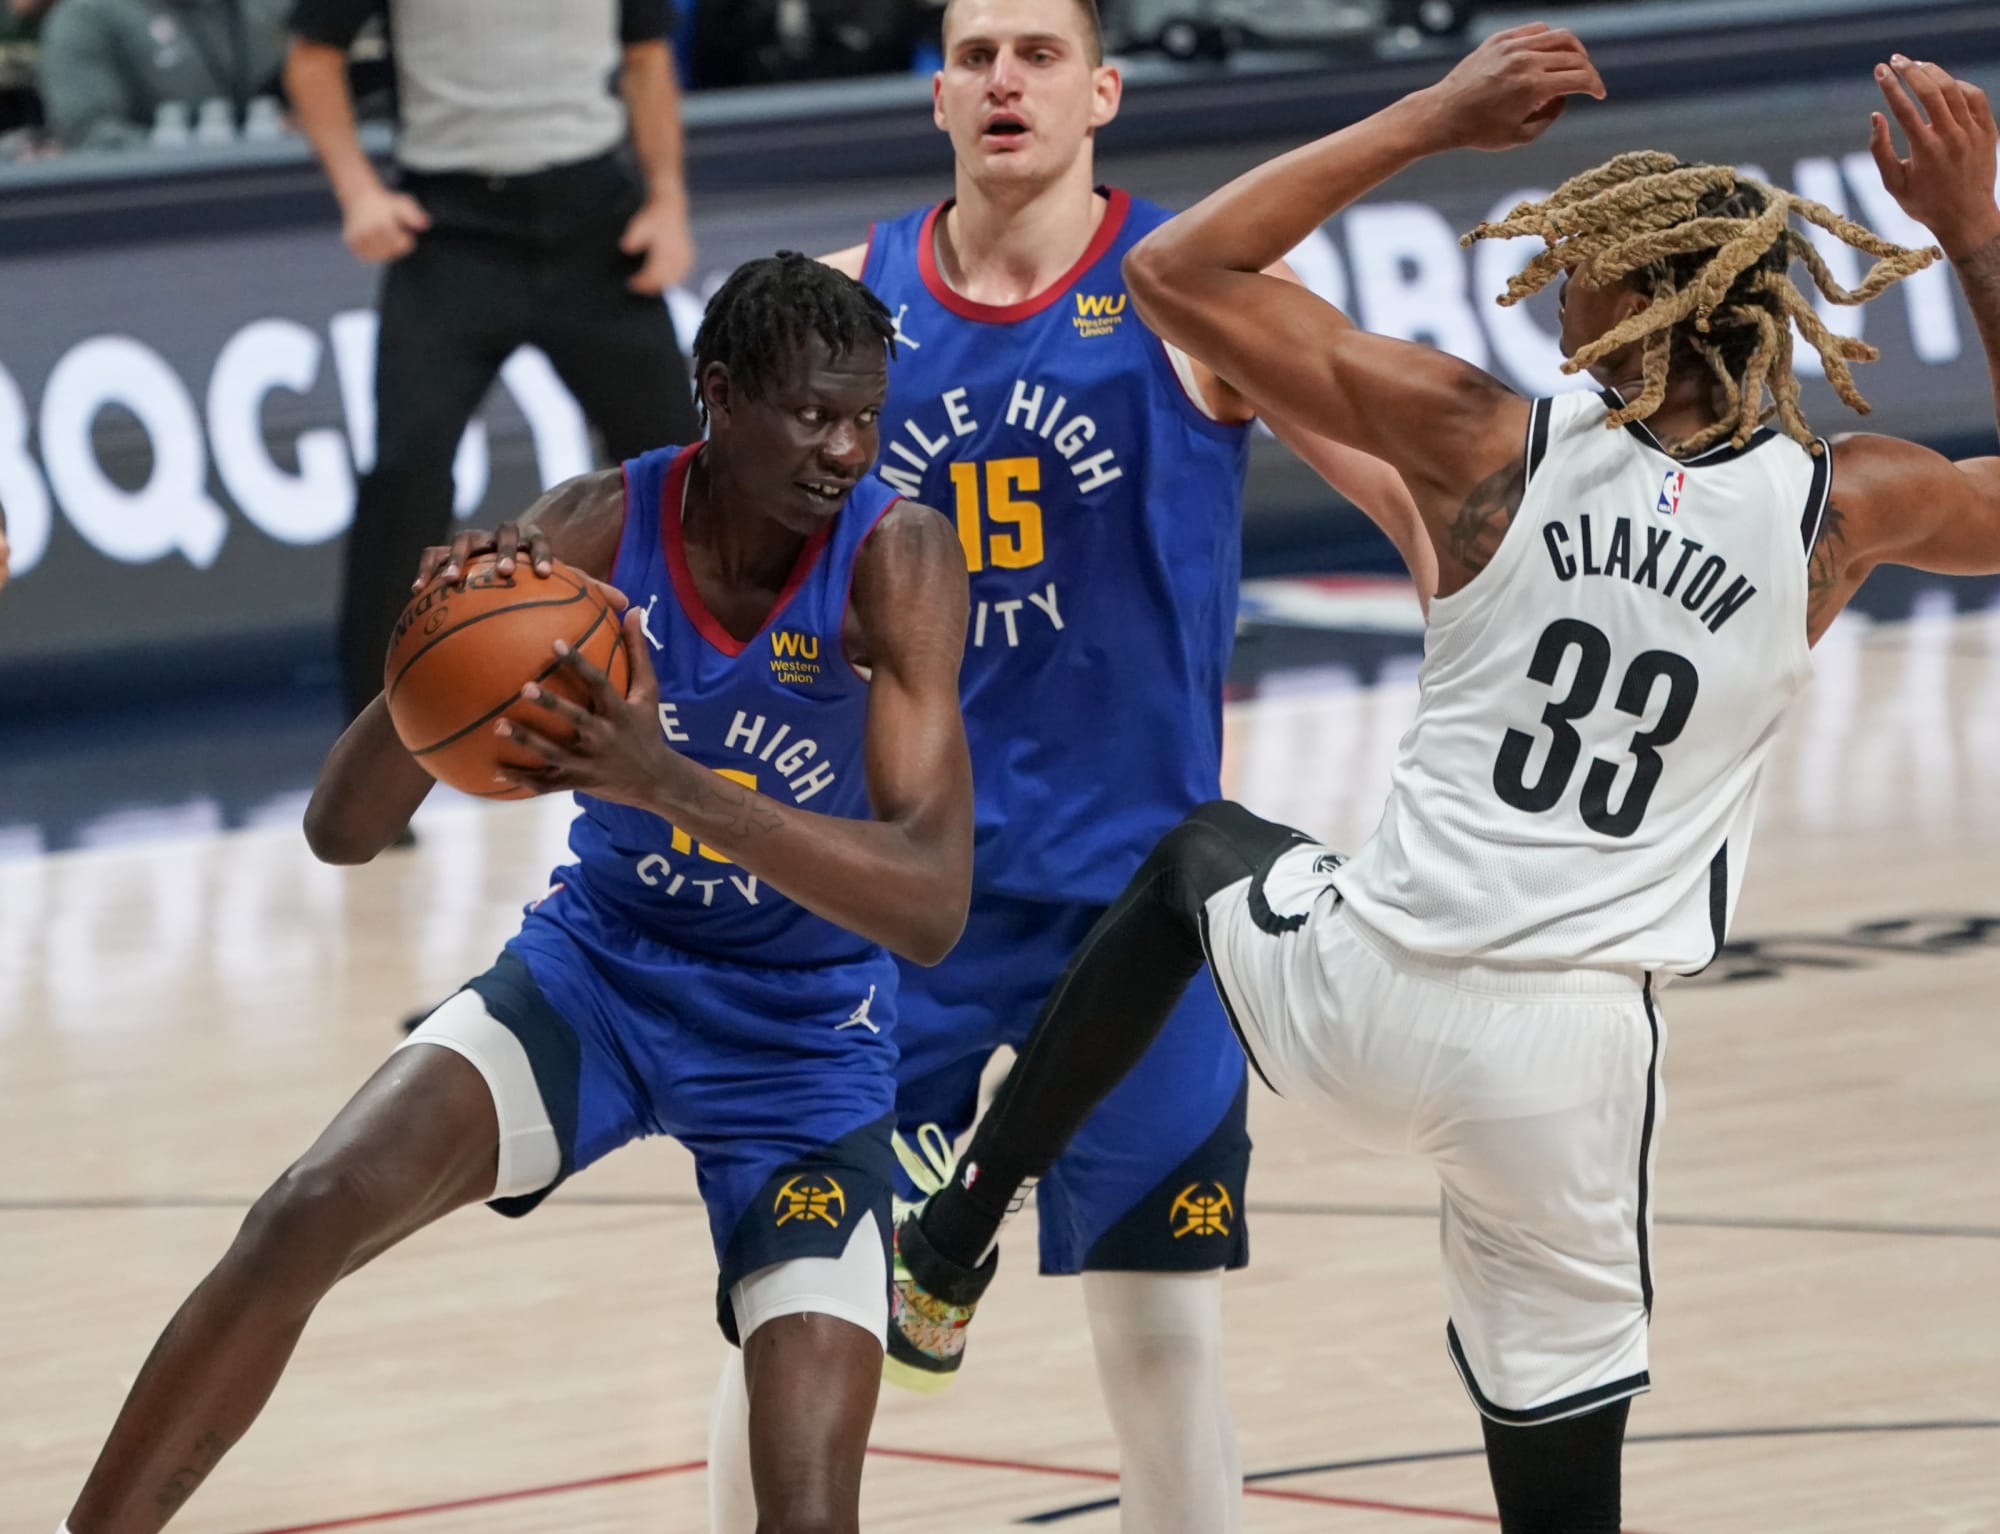 theScore - 🚨 THE Denver Nuggets HAVE ACQUIRED BOL BOL! 🚨